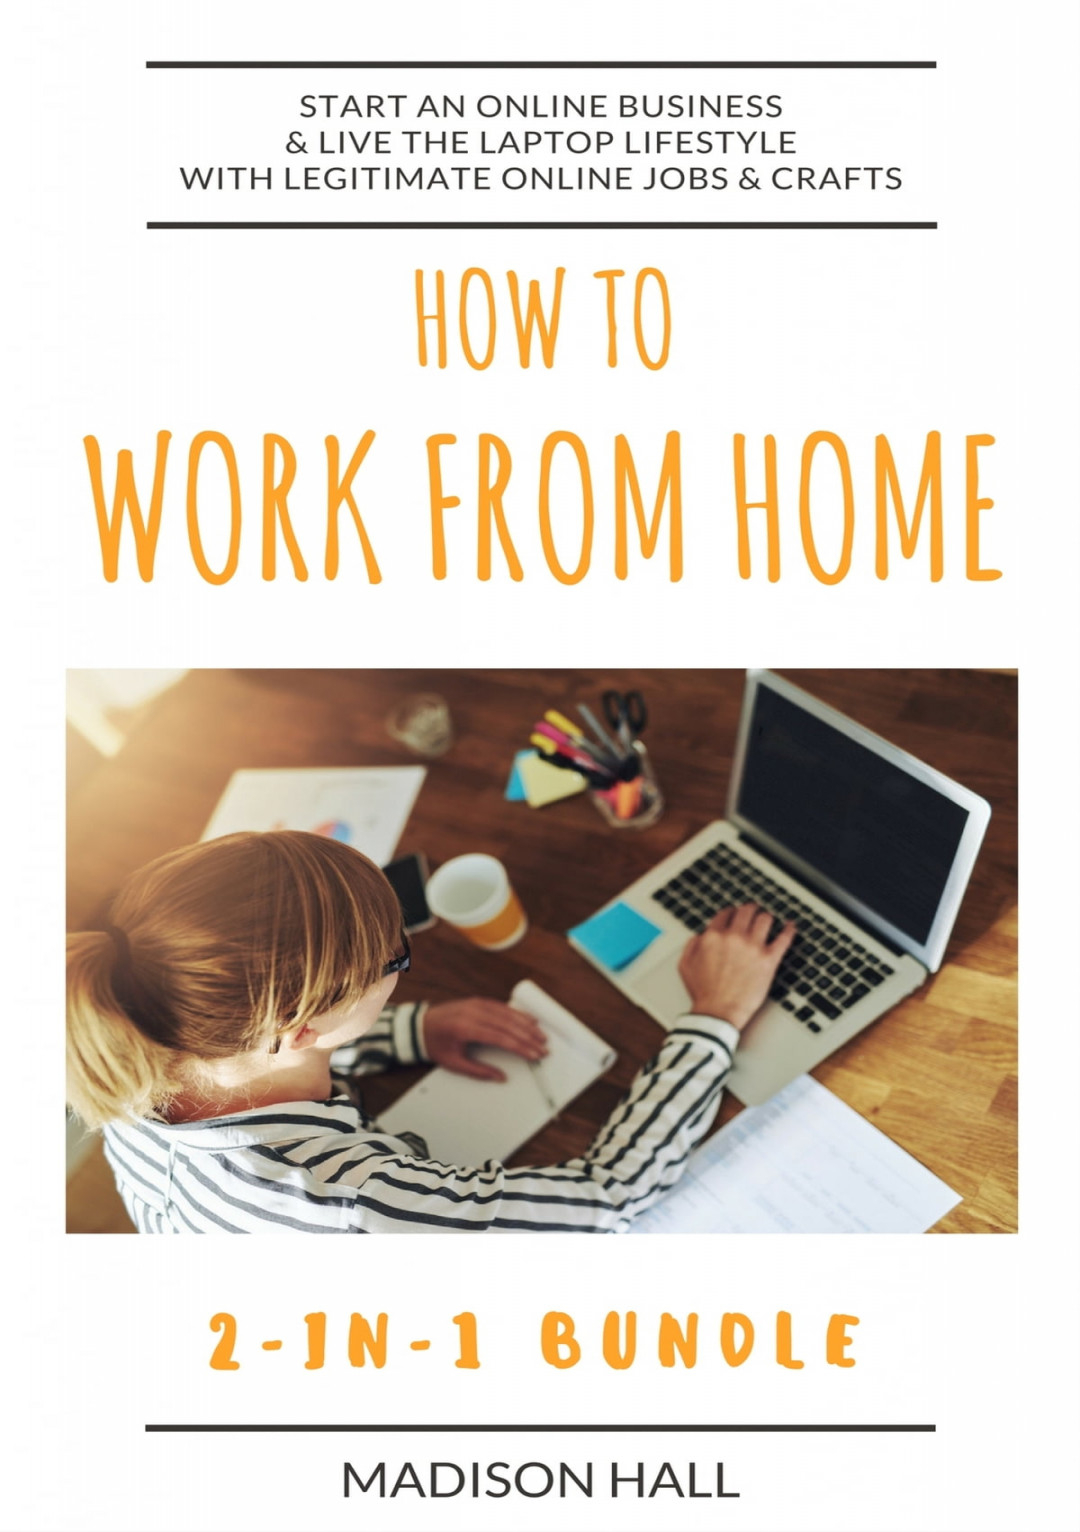 How To Work From Home (-in- Bundle) ebook by Madison Hall - Rakuten Kobo